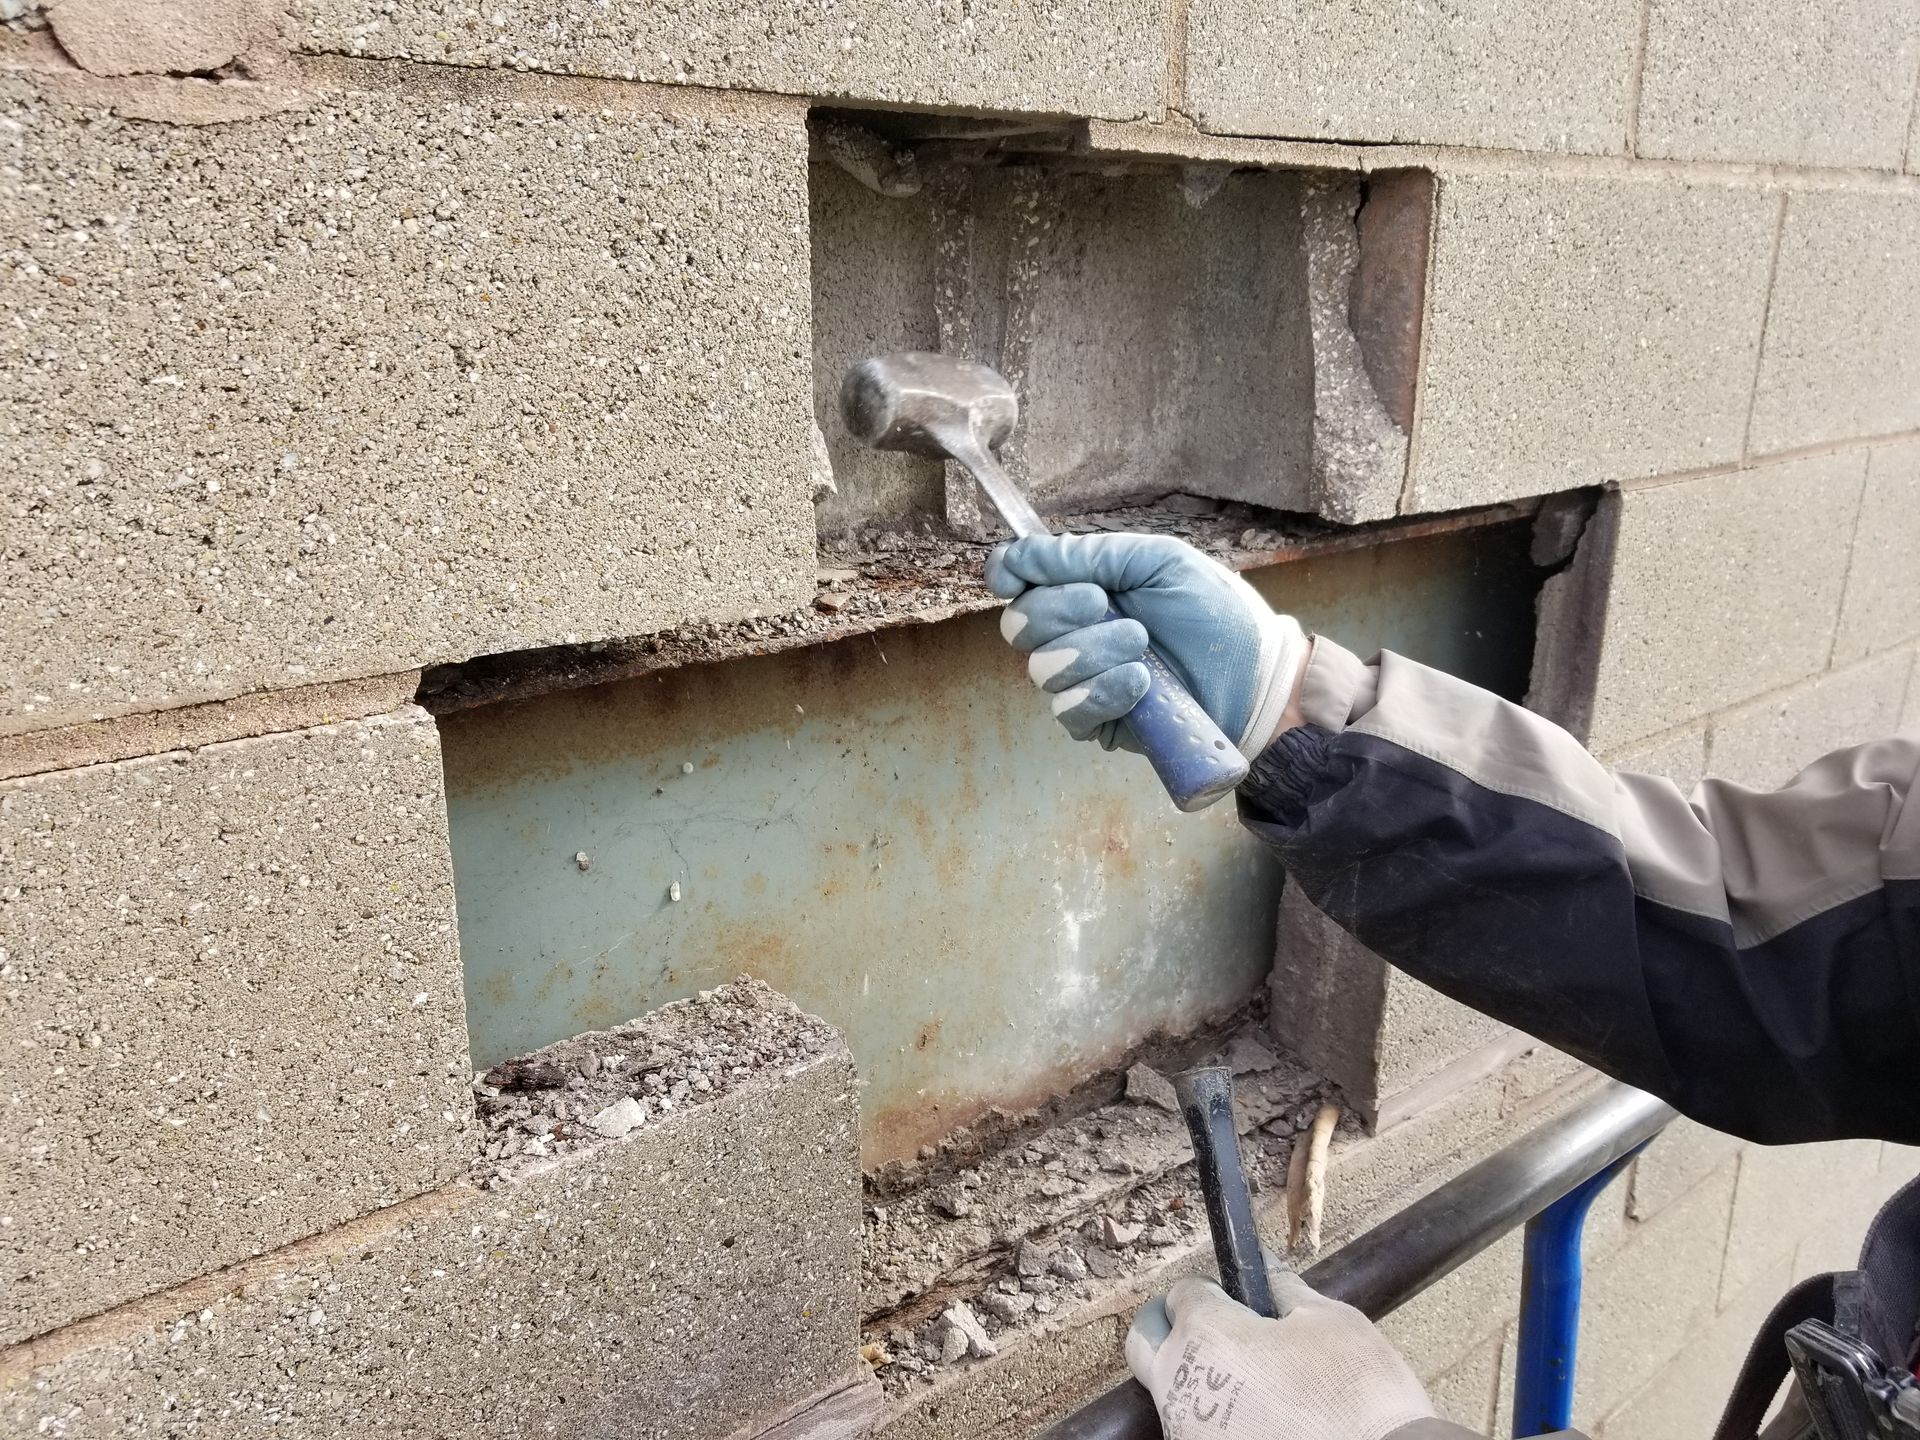 Stonemason replacing stone on a wall that has water damage underneath - a big concern